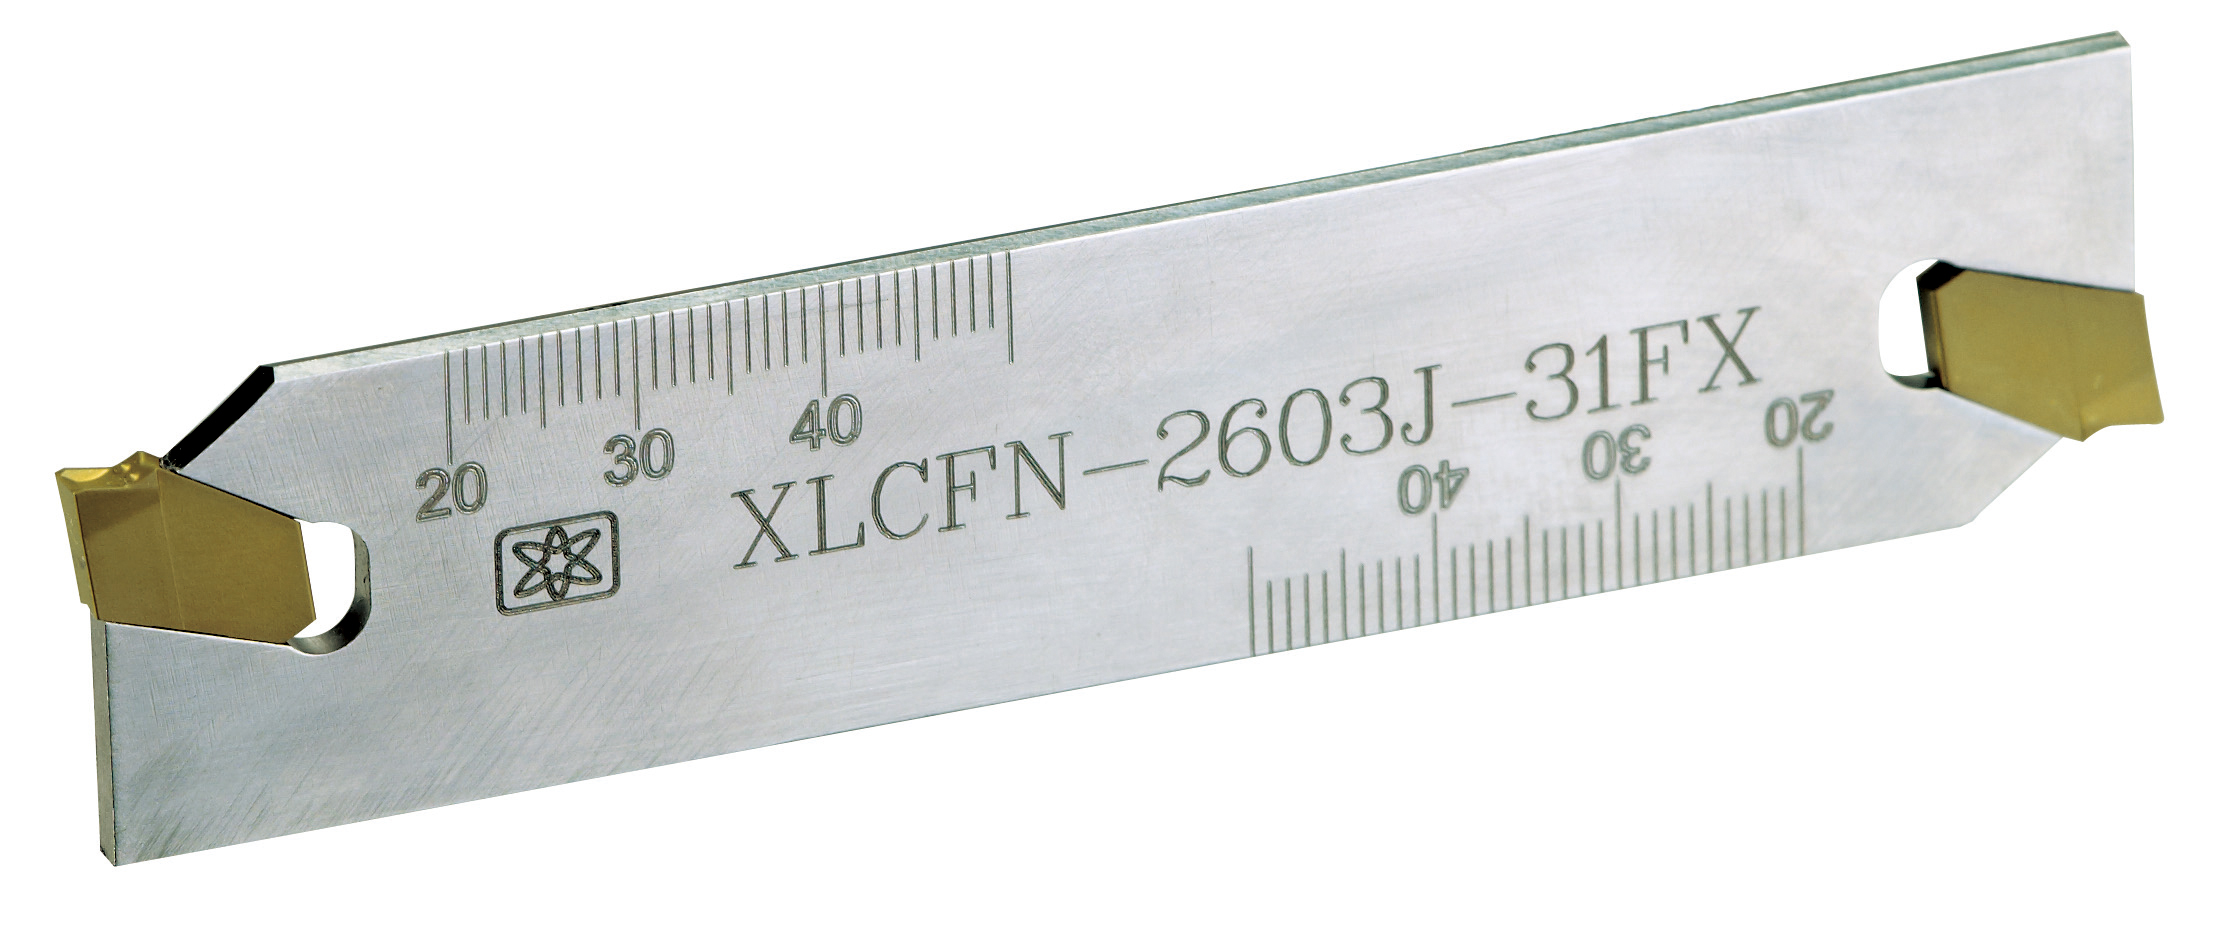 Products|XLCFN (FX3.1... / FX4.1...) Parting Blade